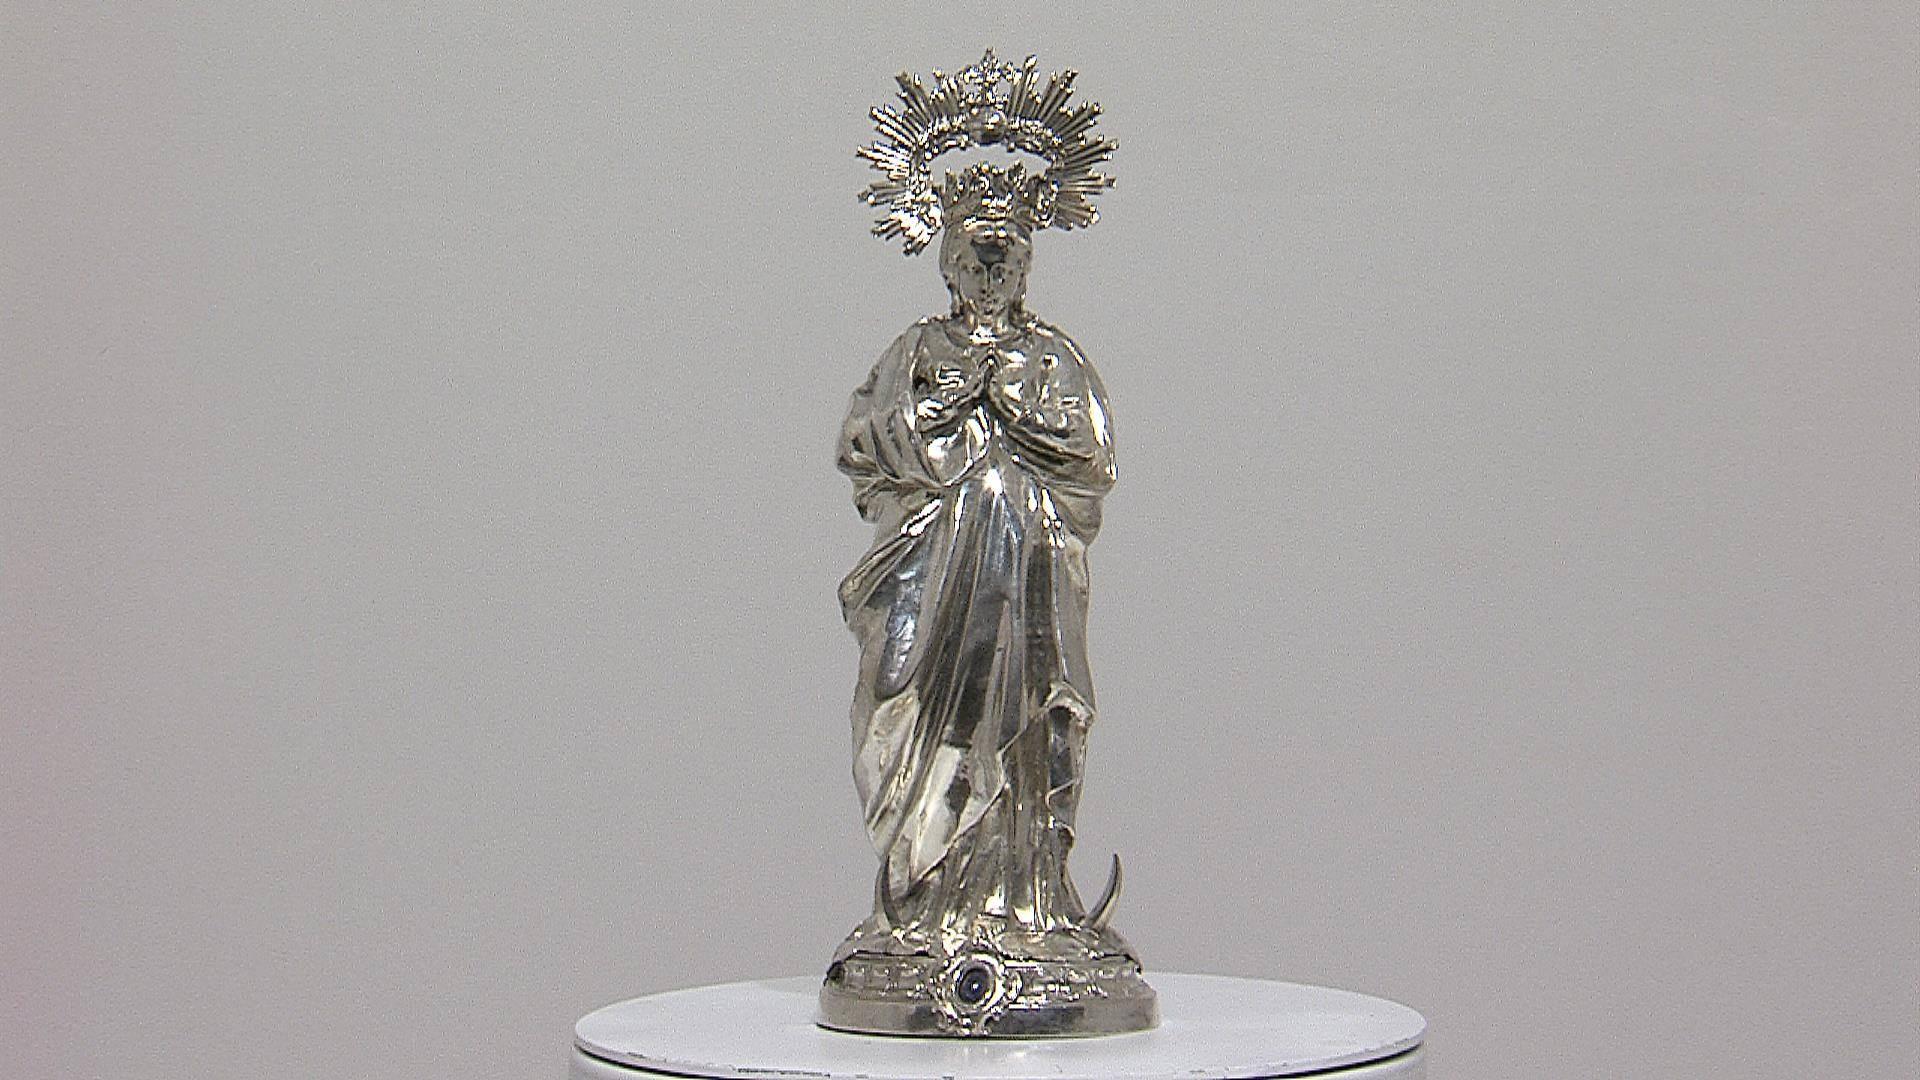 A set of four silver repoussé sculptures depicting Christ, the Virgin Mary, Mary Magdalene and Saint John.
By silversmith Bartolomeo Borroni,
Rome, circa 1750.

Repoussé (or repoussage) is a metalworking technique in which a malleable metal is